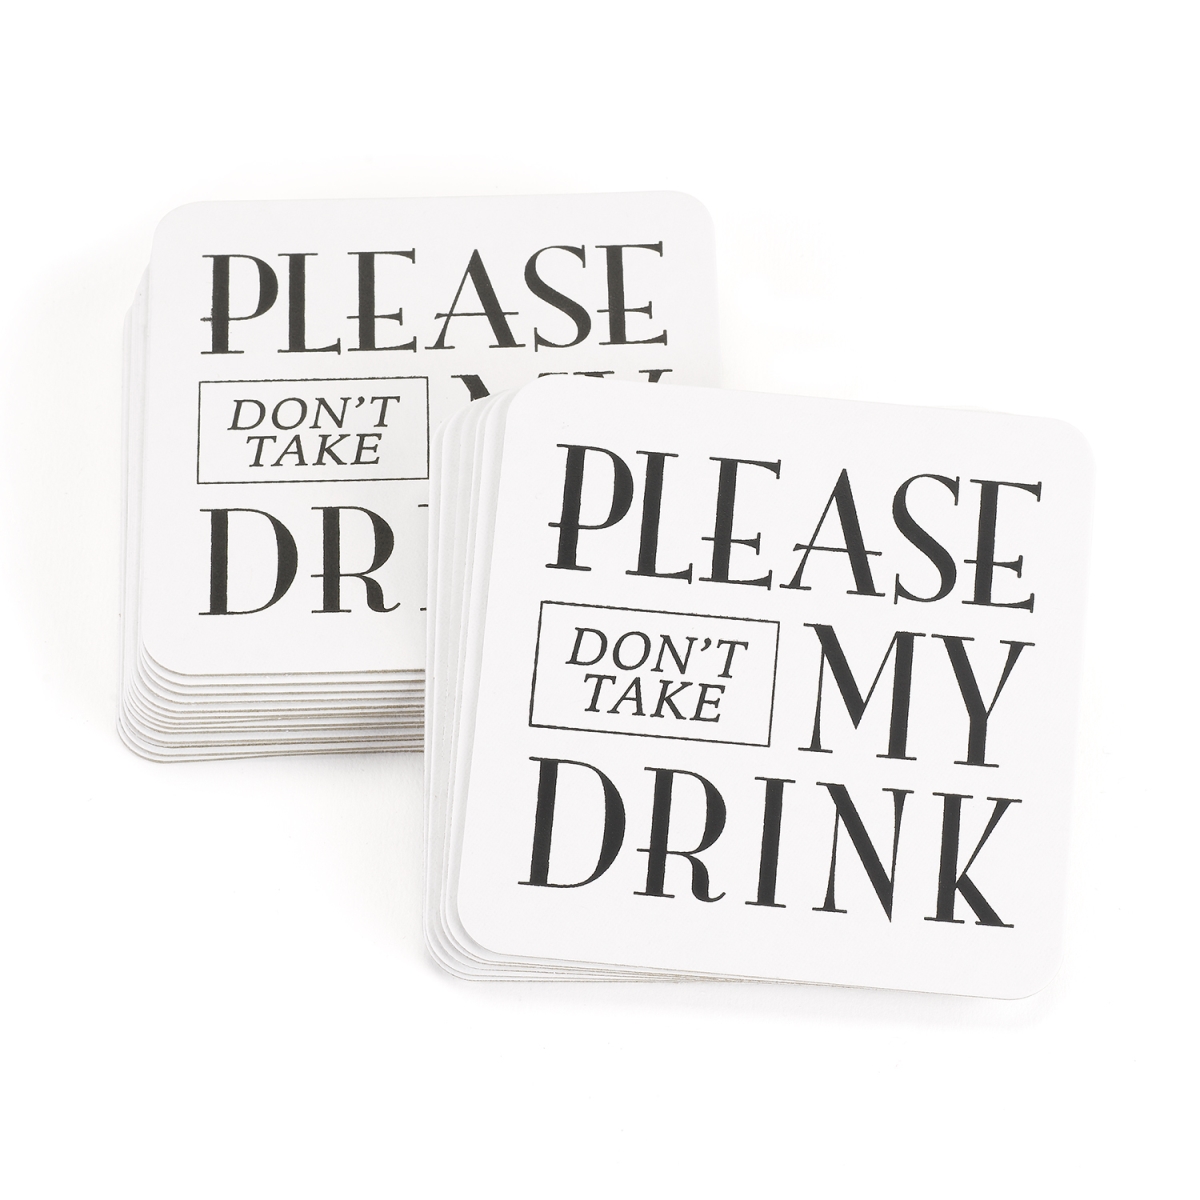 Hortense B. Hewitt 21572 Dont Take My Drink Coasters - Pack Of 25